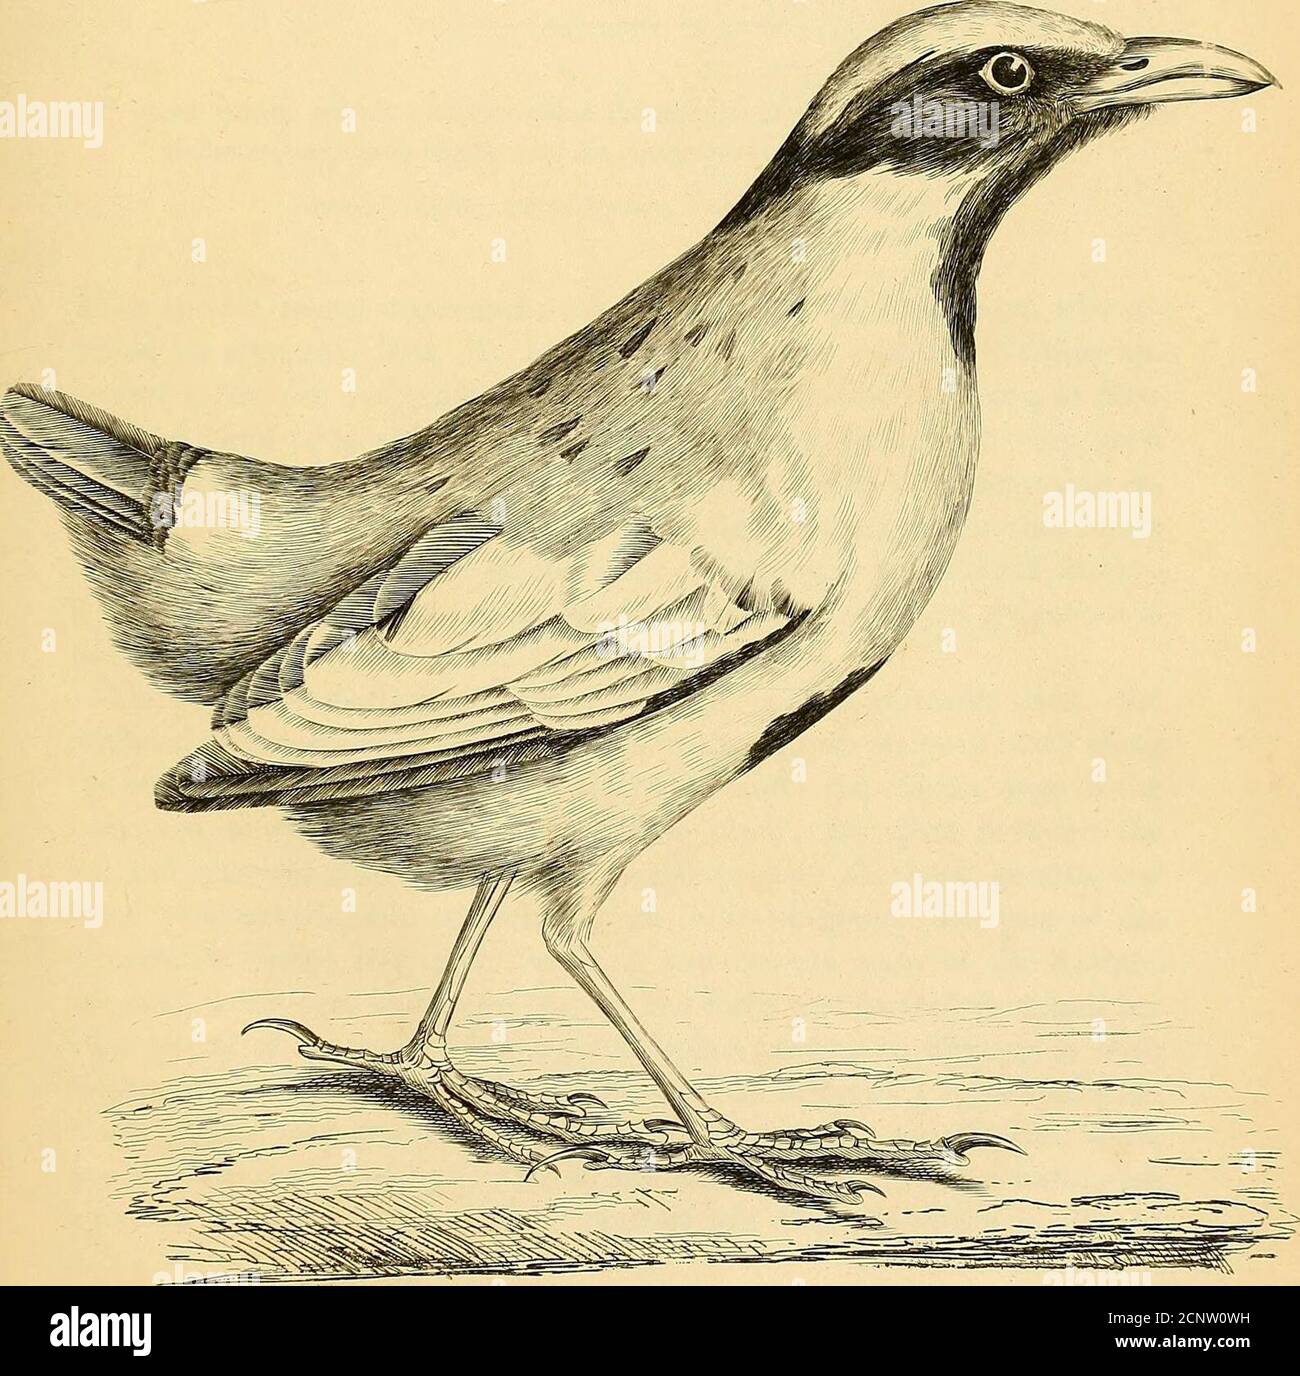 . Illustrations of ornithology . 77.. J////r ,&gt;//i/^/rt//.y PITTA STREPITANS, Temmmck.Noisy Pitta. PLATE LXXVII. P. supra viridis, subtus ochracea, pileo ferrugineo, medio linea nigra, genis, nuchaabdomineque medio nigris, scapulis europygio coeruleis, crista coccinea. Breve reveilleur; Pitta strepitans, Temm. PI. Col. 333. This species seems unnoticed until the figure of M. Temminck, who re-ceived his specimen from Mr Leadbeater of this country. It then ap-peared to be the only individual of this form known to belong to NewHolland; and it is only lately that Mr Swainson has, upon very good Stock Photo